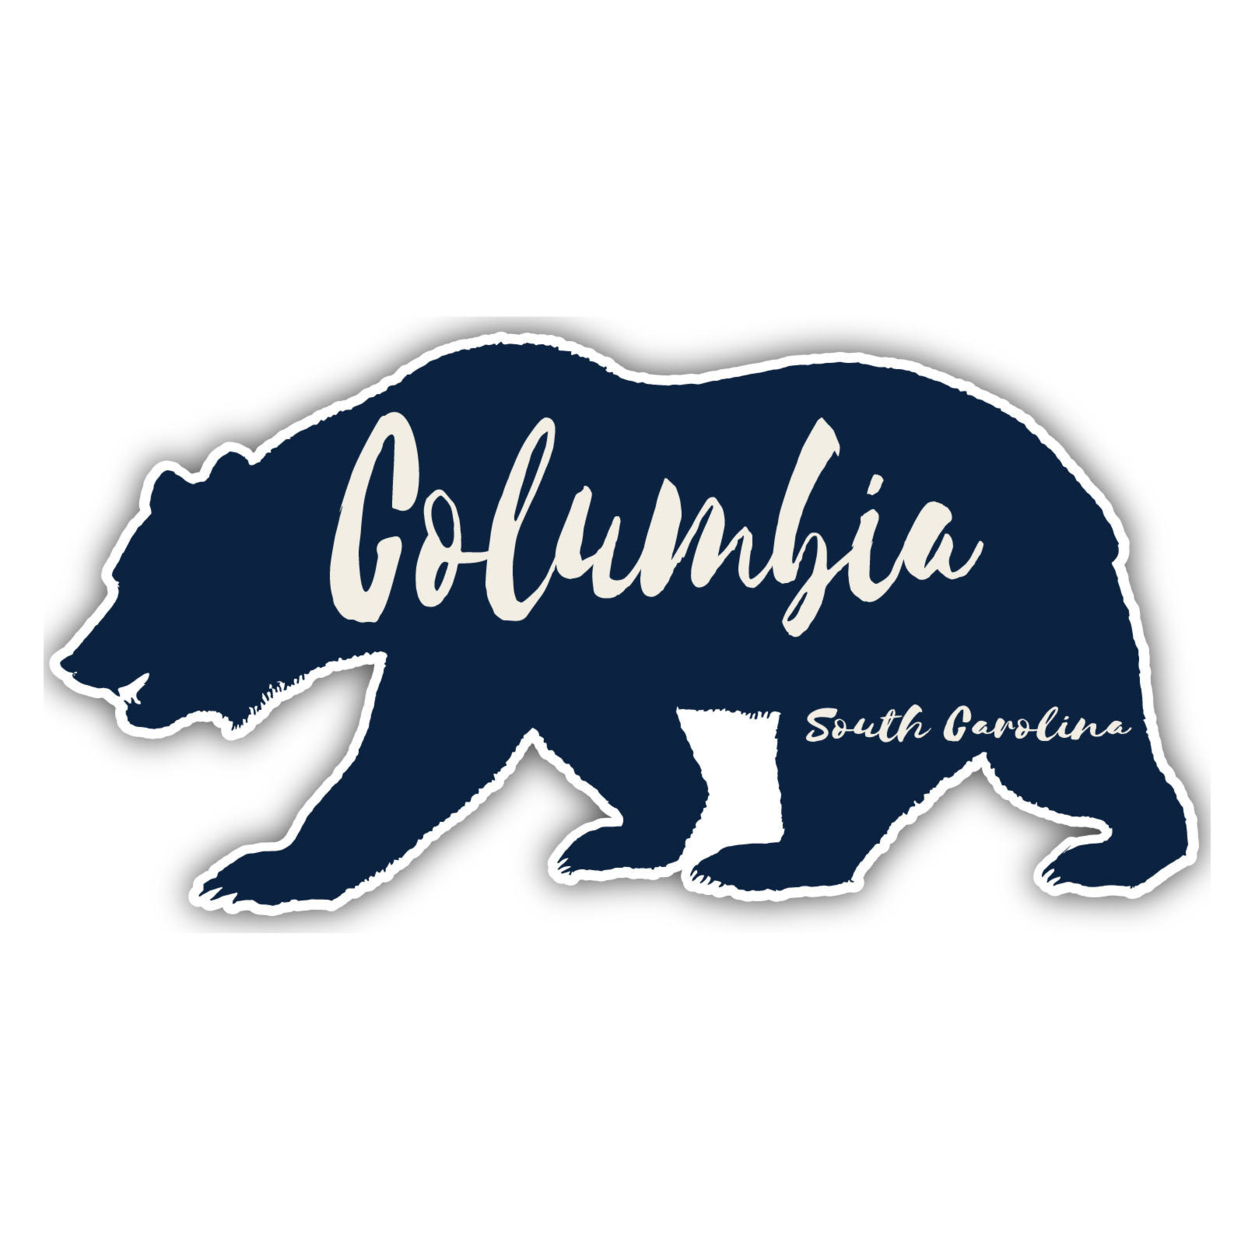 Columbia South Carolina Souvenir Decorative Stickers (Choose Theme And Size) - 4-Pack, 2-Inch, Bear